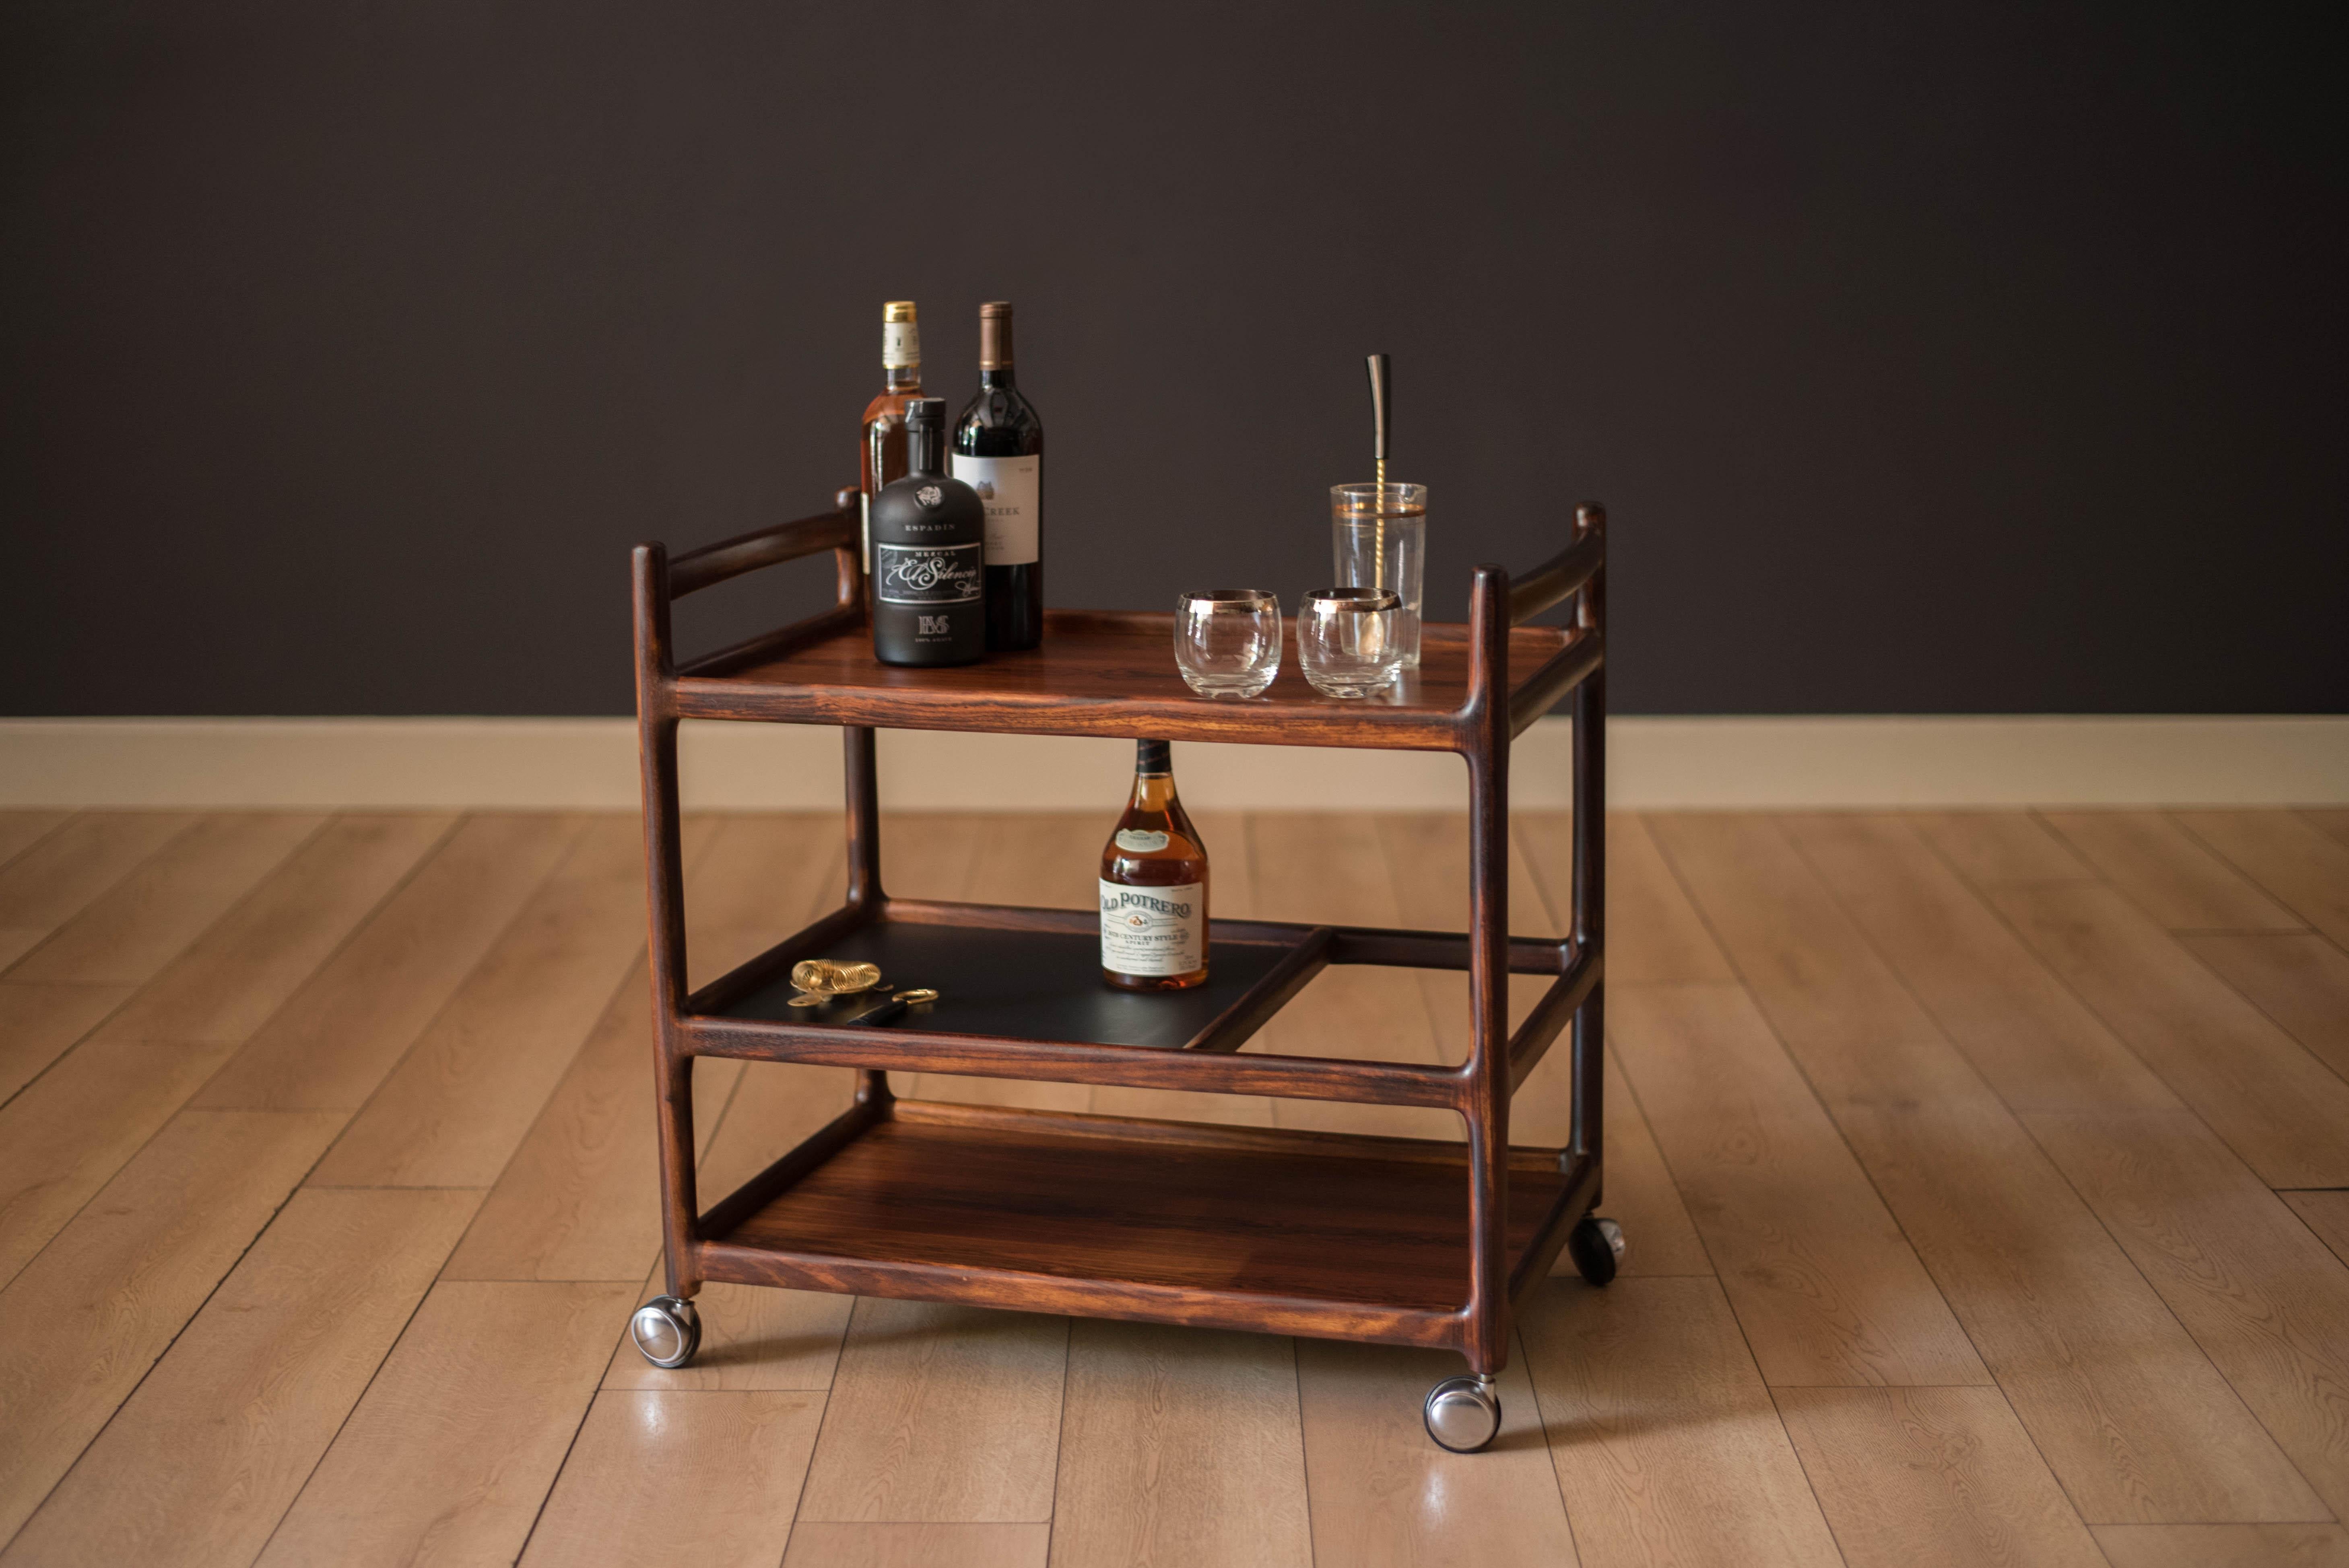 Mid-Century Modern bar cart trolley designed by Johannes Andersen for CFC Silkeborg circa 1960s, Denmark. Features three tiers of shelving storage perfect for tall bottles and glassware. Sculpturally crafted in solid rosewood and includes an easy to